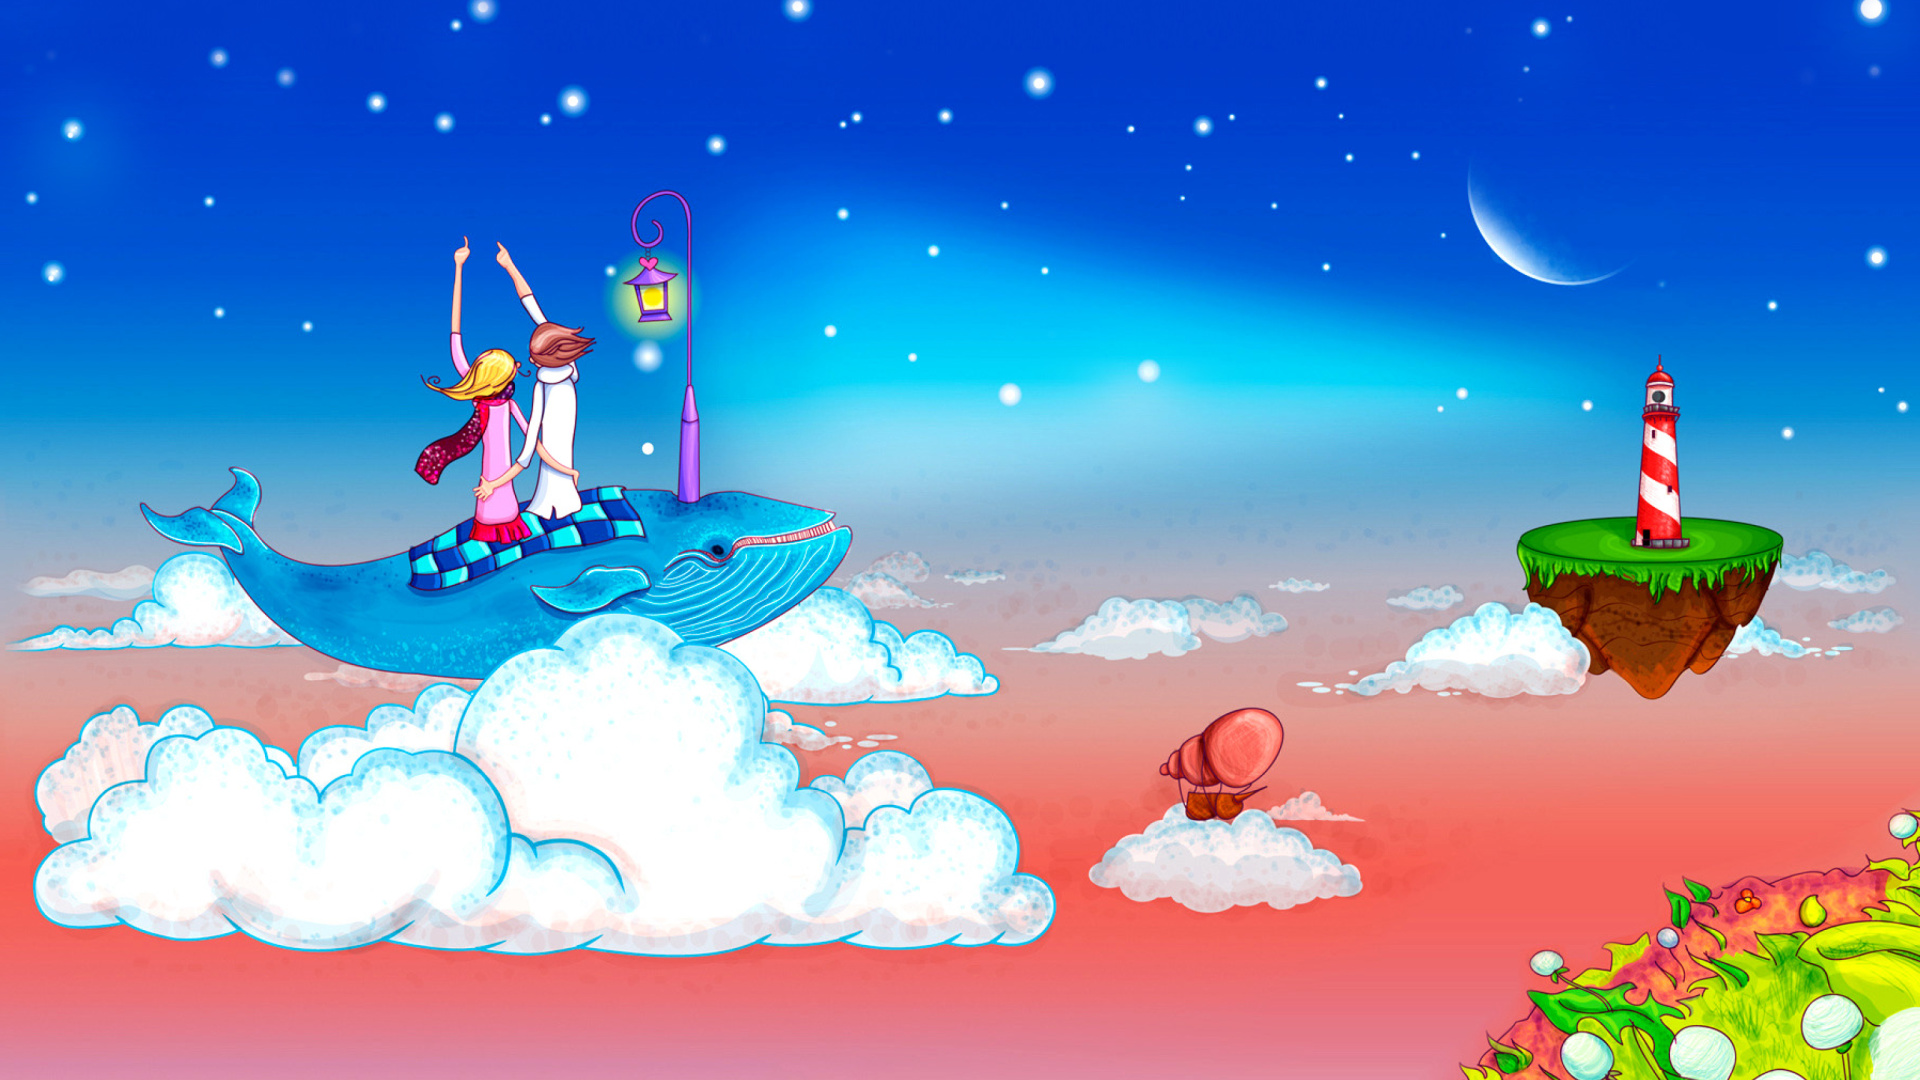 Love on Clouds wallpaper 1920x1080